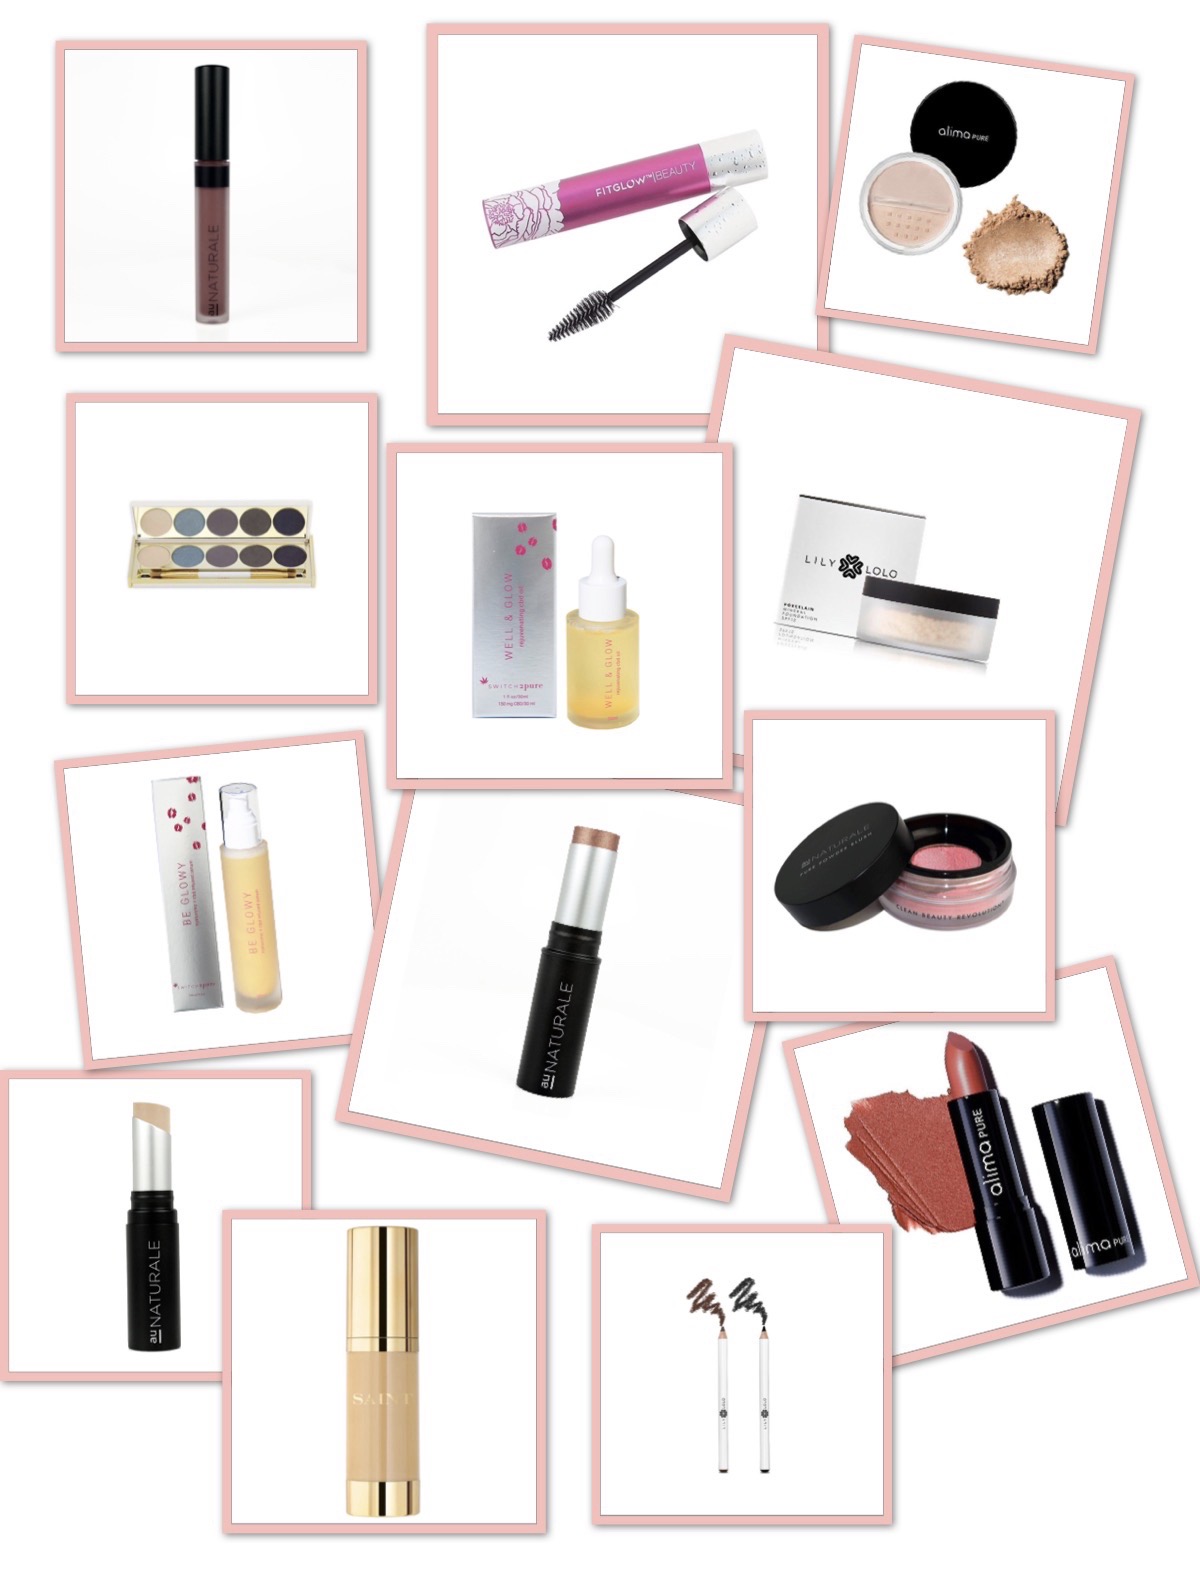 Switch2pure fave makeup picks